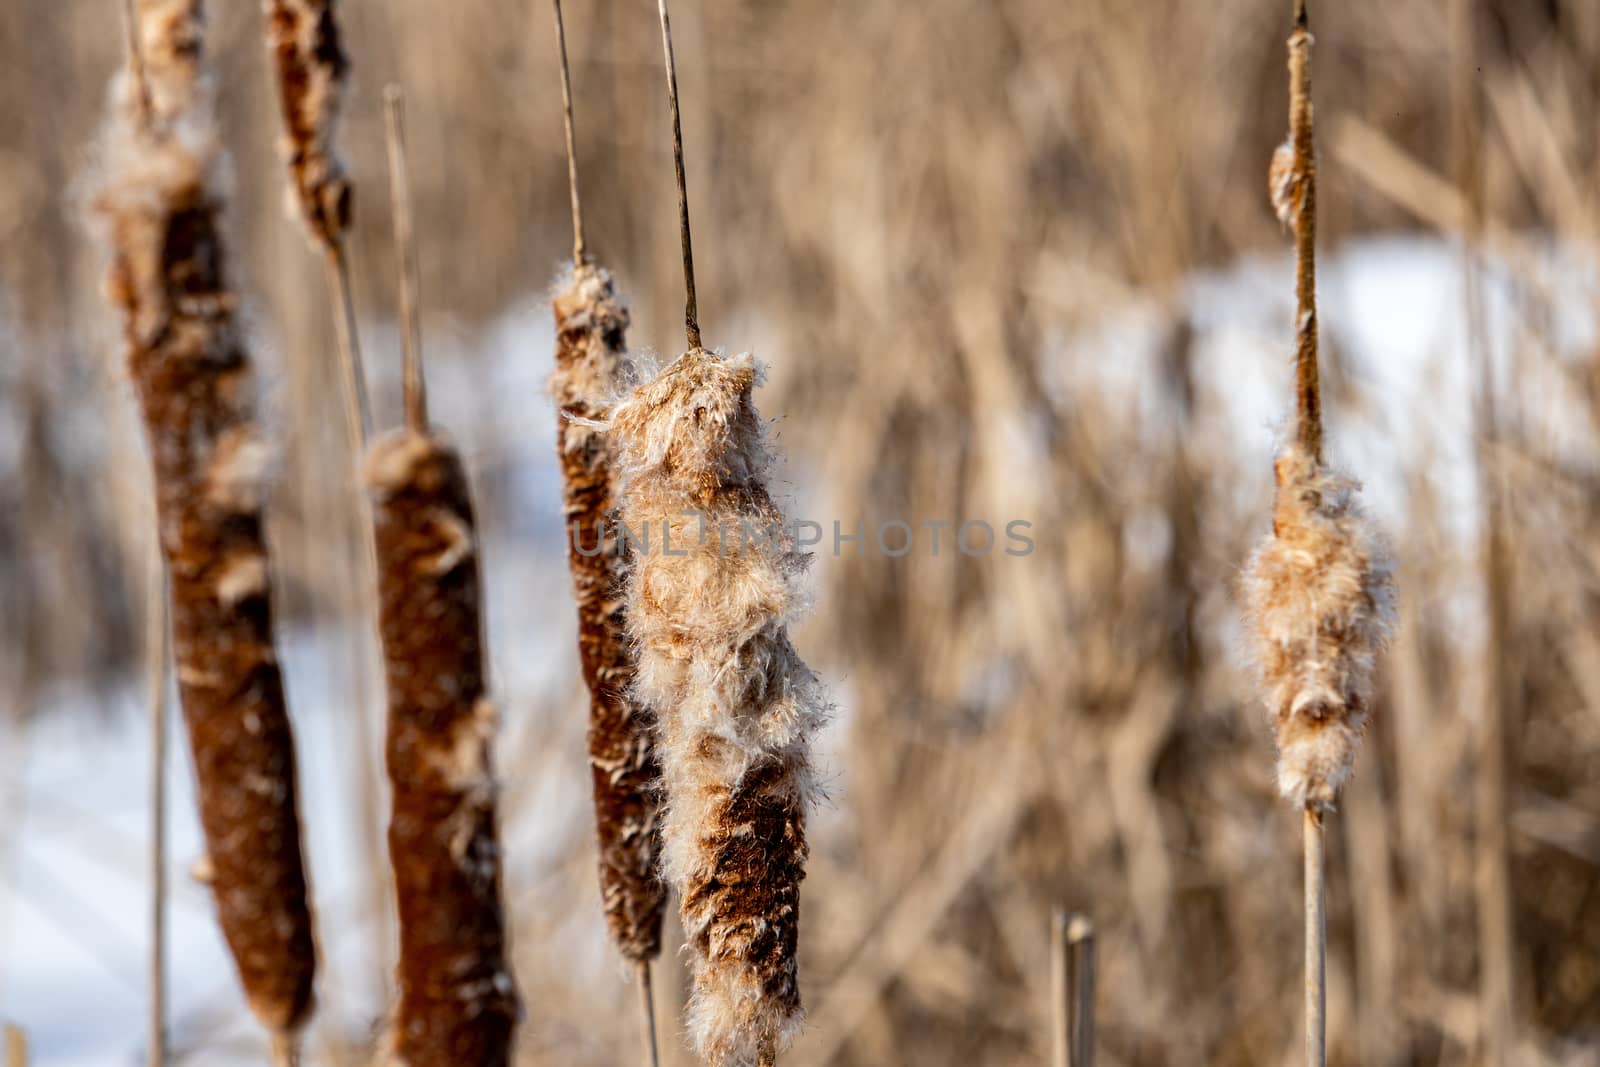 Cattail reeds, or bulrushes, are seen in the winter in a marsh area. Several stems hold up the narrowleaf clusters of tiny flowers, with many now fluffy in the winter season.